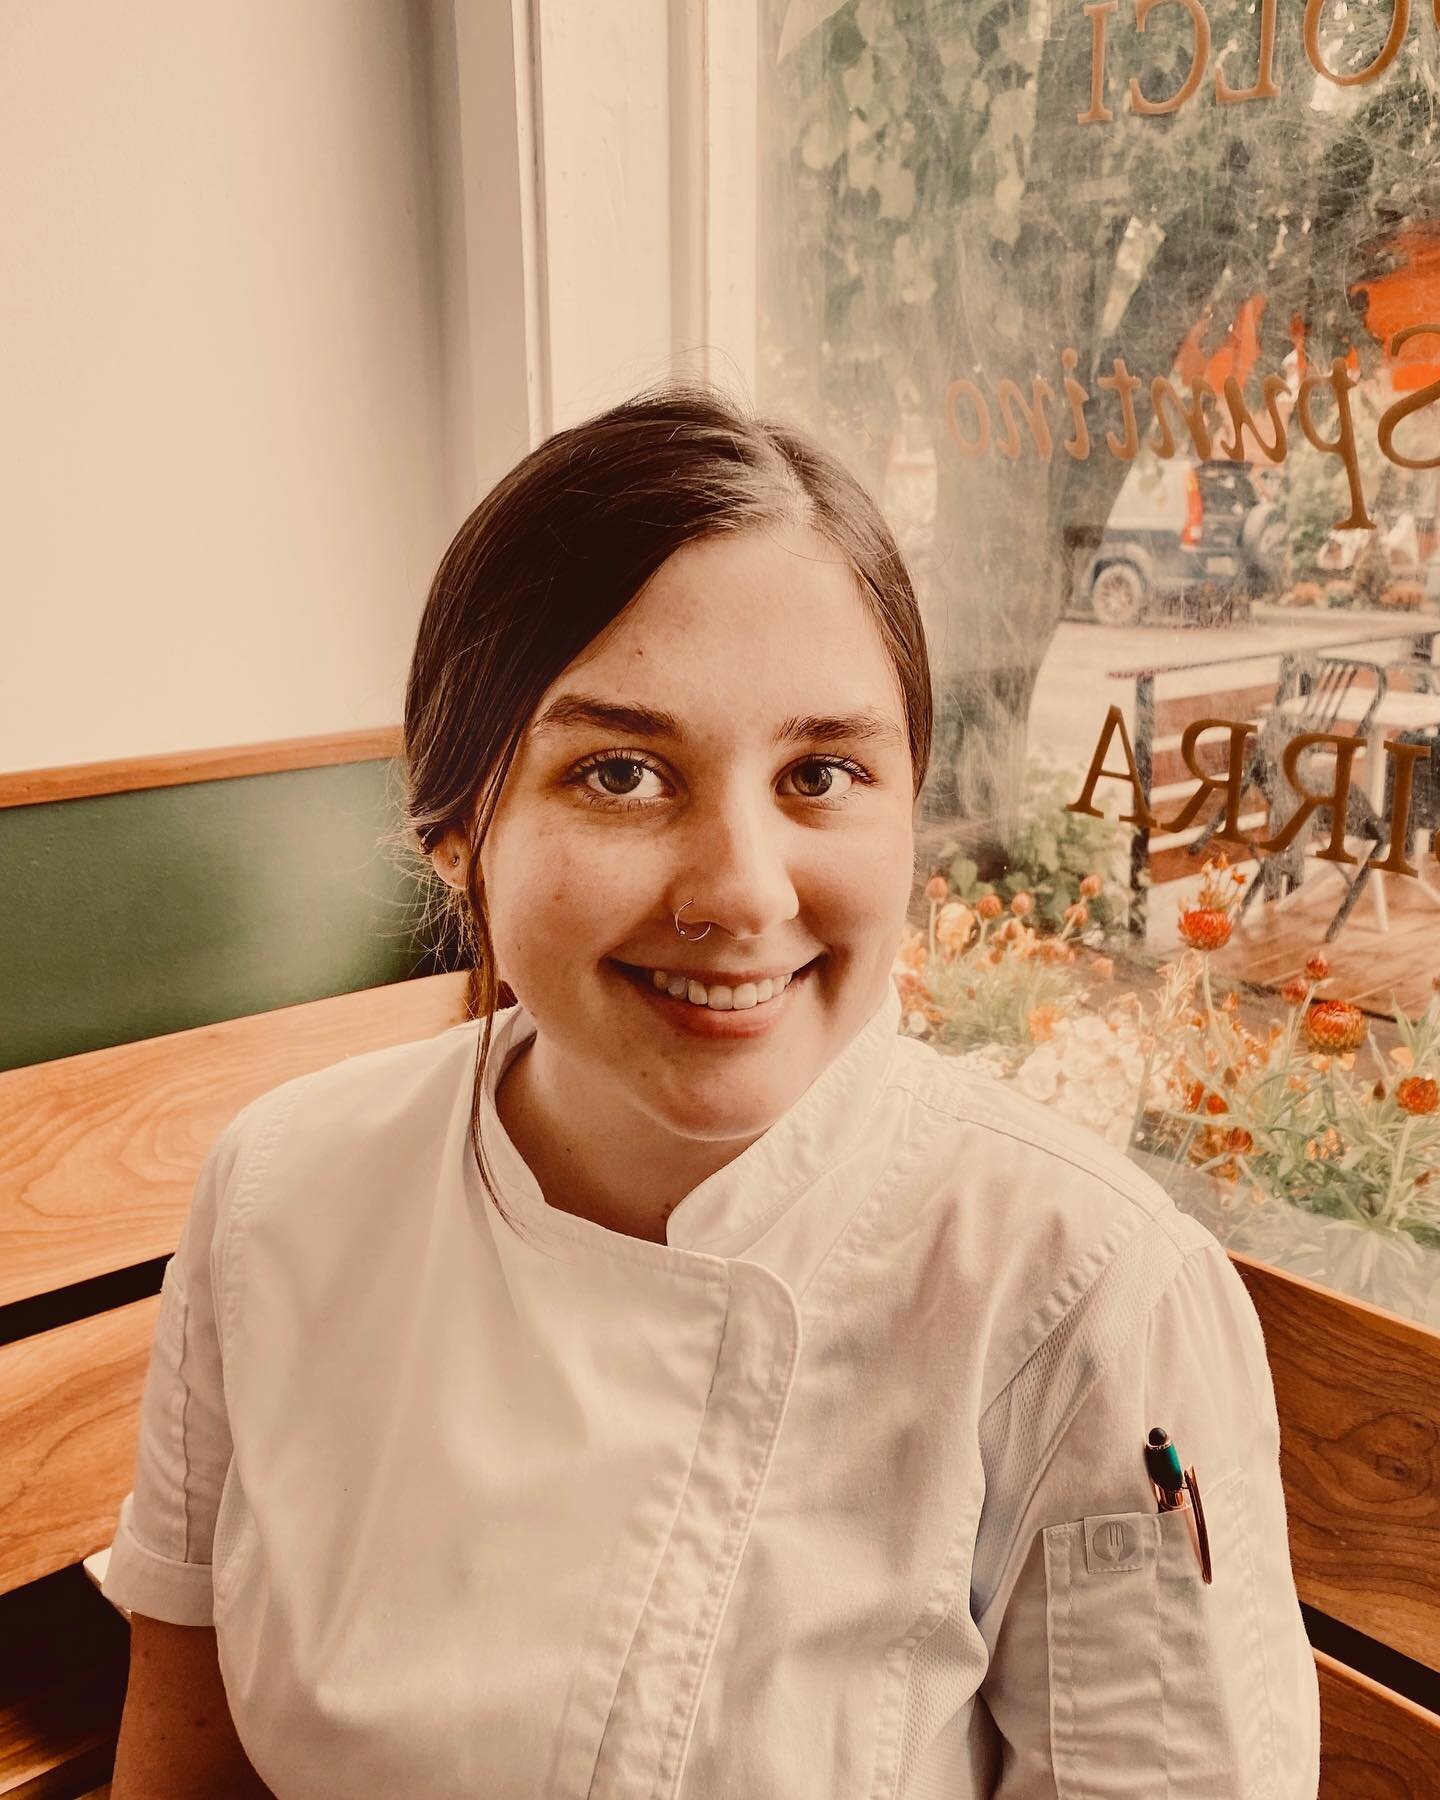 ✨ Meet Courtney ✨

She is our baker extraordinaire;  meticulously making each little tart shell, Baiocchi, Piccolina, Anisette biscotti, Crostata and more!

Her quiet demeanour and sweet voice counter her steadfast attention to detail and hard work. 